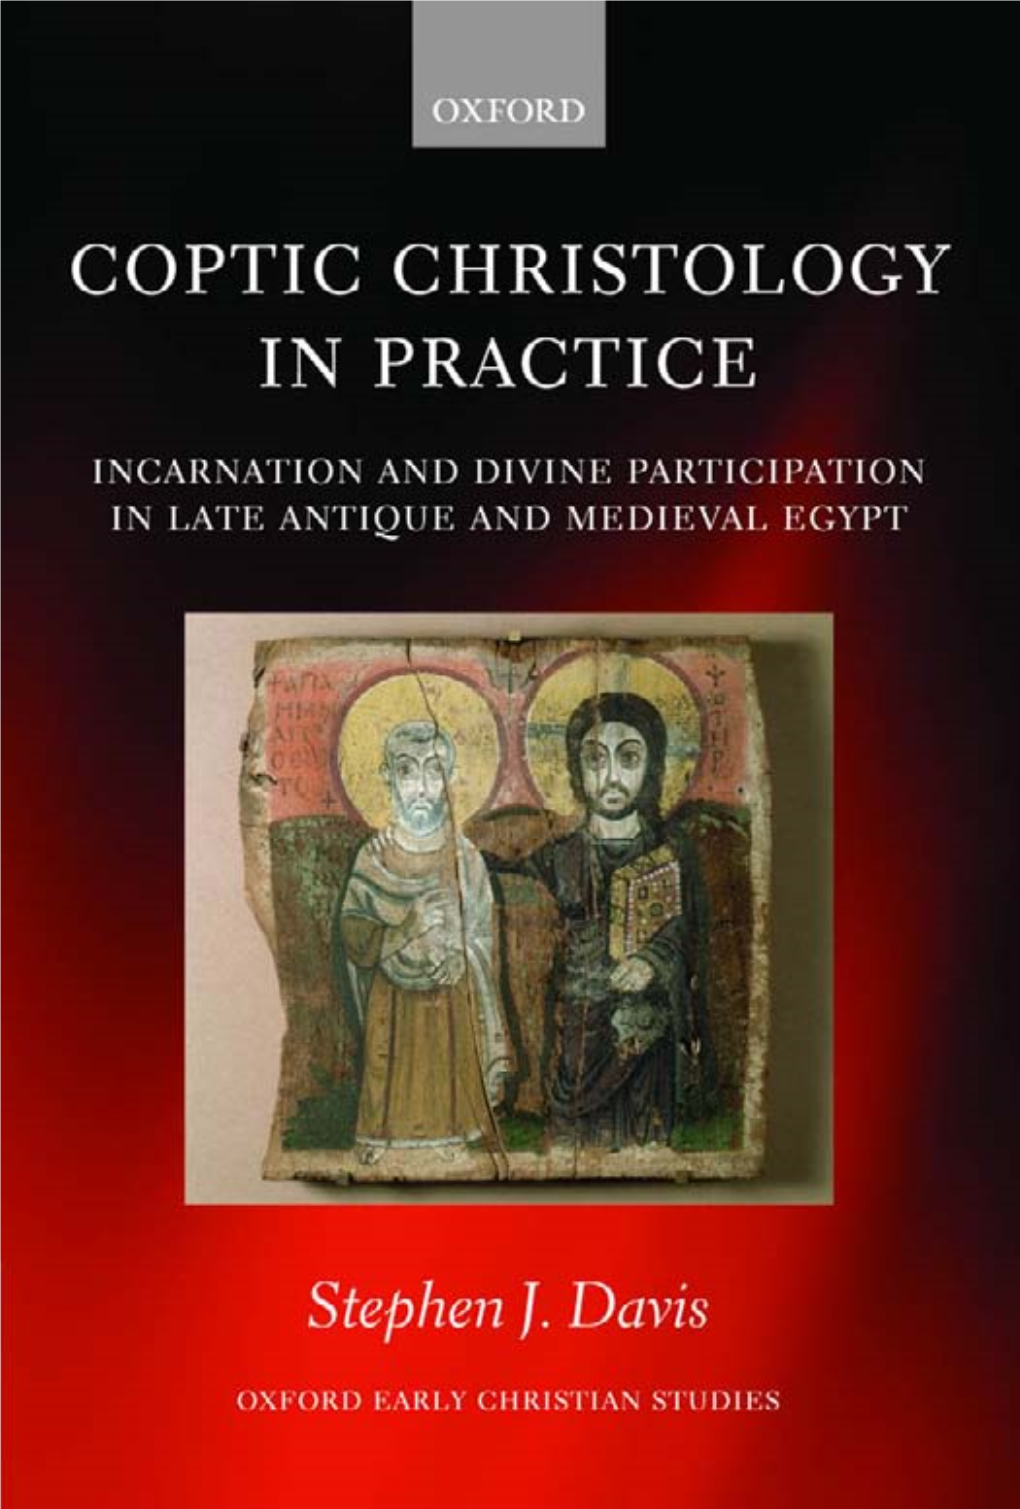 Coptic Christology in Practice: Incarnation and Divine Participation